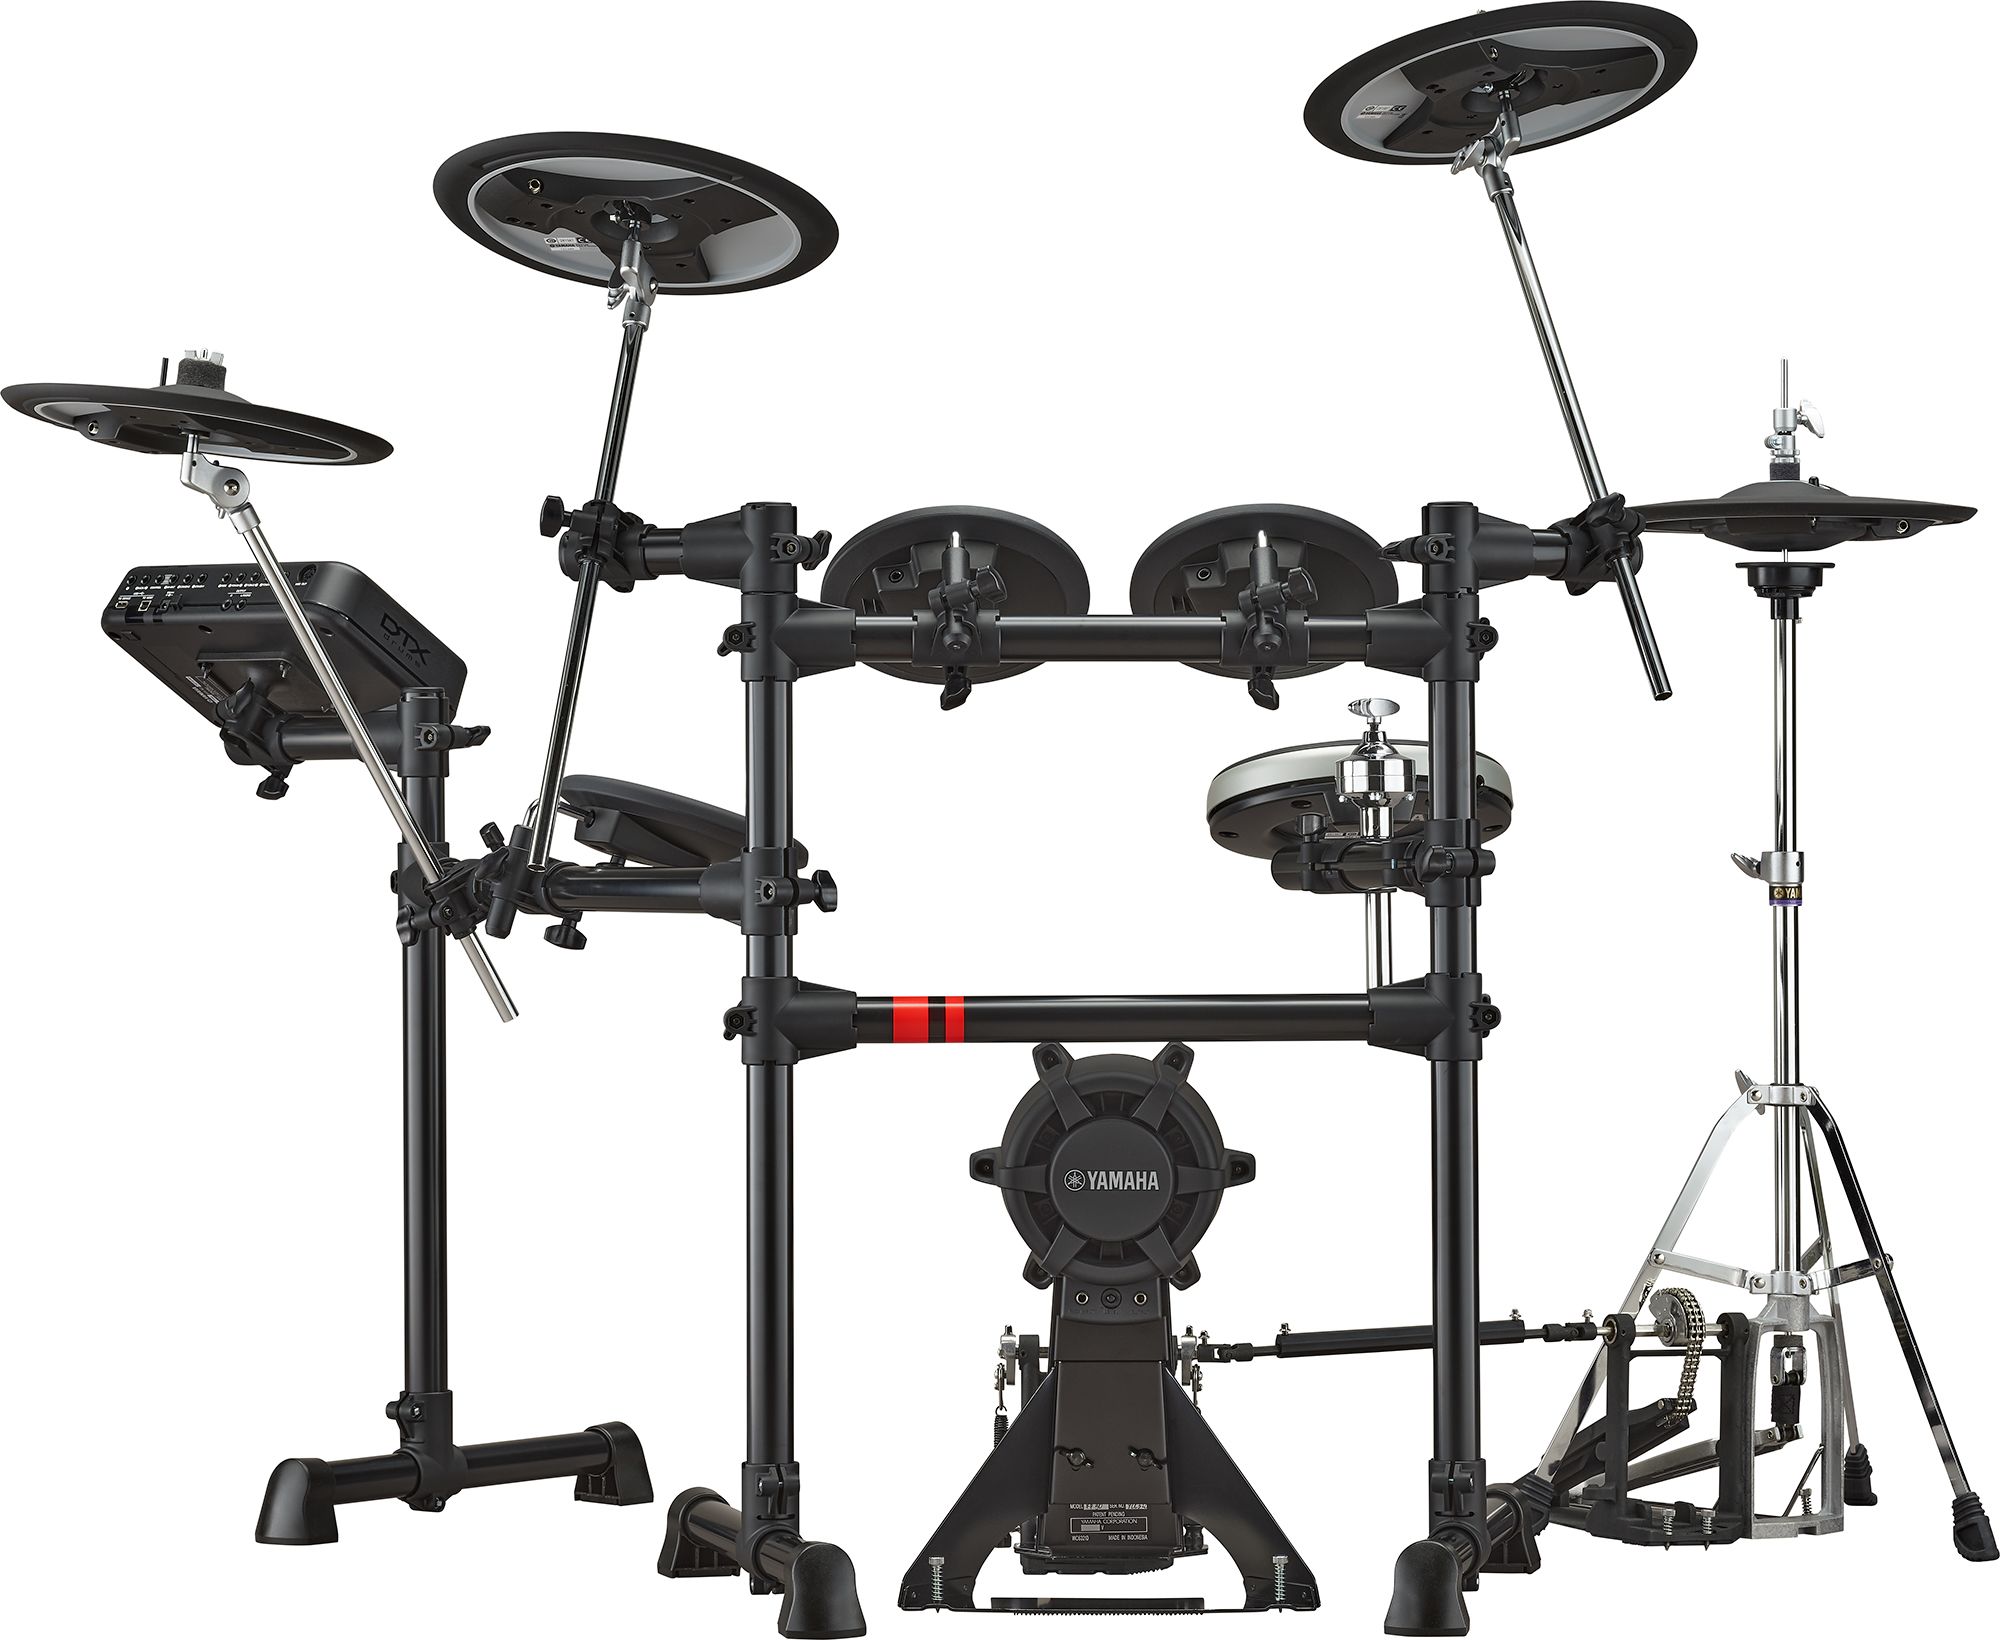 Latin - Series Electronic / Middle / - Musical Africa Kits Yamaha Oceania - - DTX6 Products / / CIS / Asia Instruments - Drums America East Drums - - Electronic Products Drum -